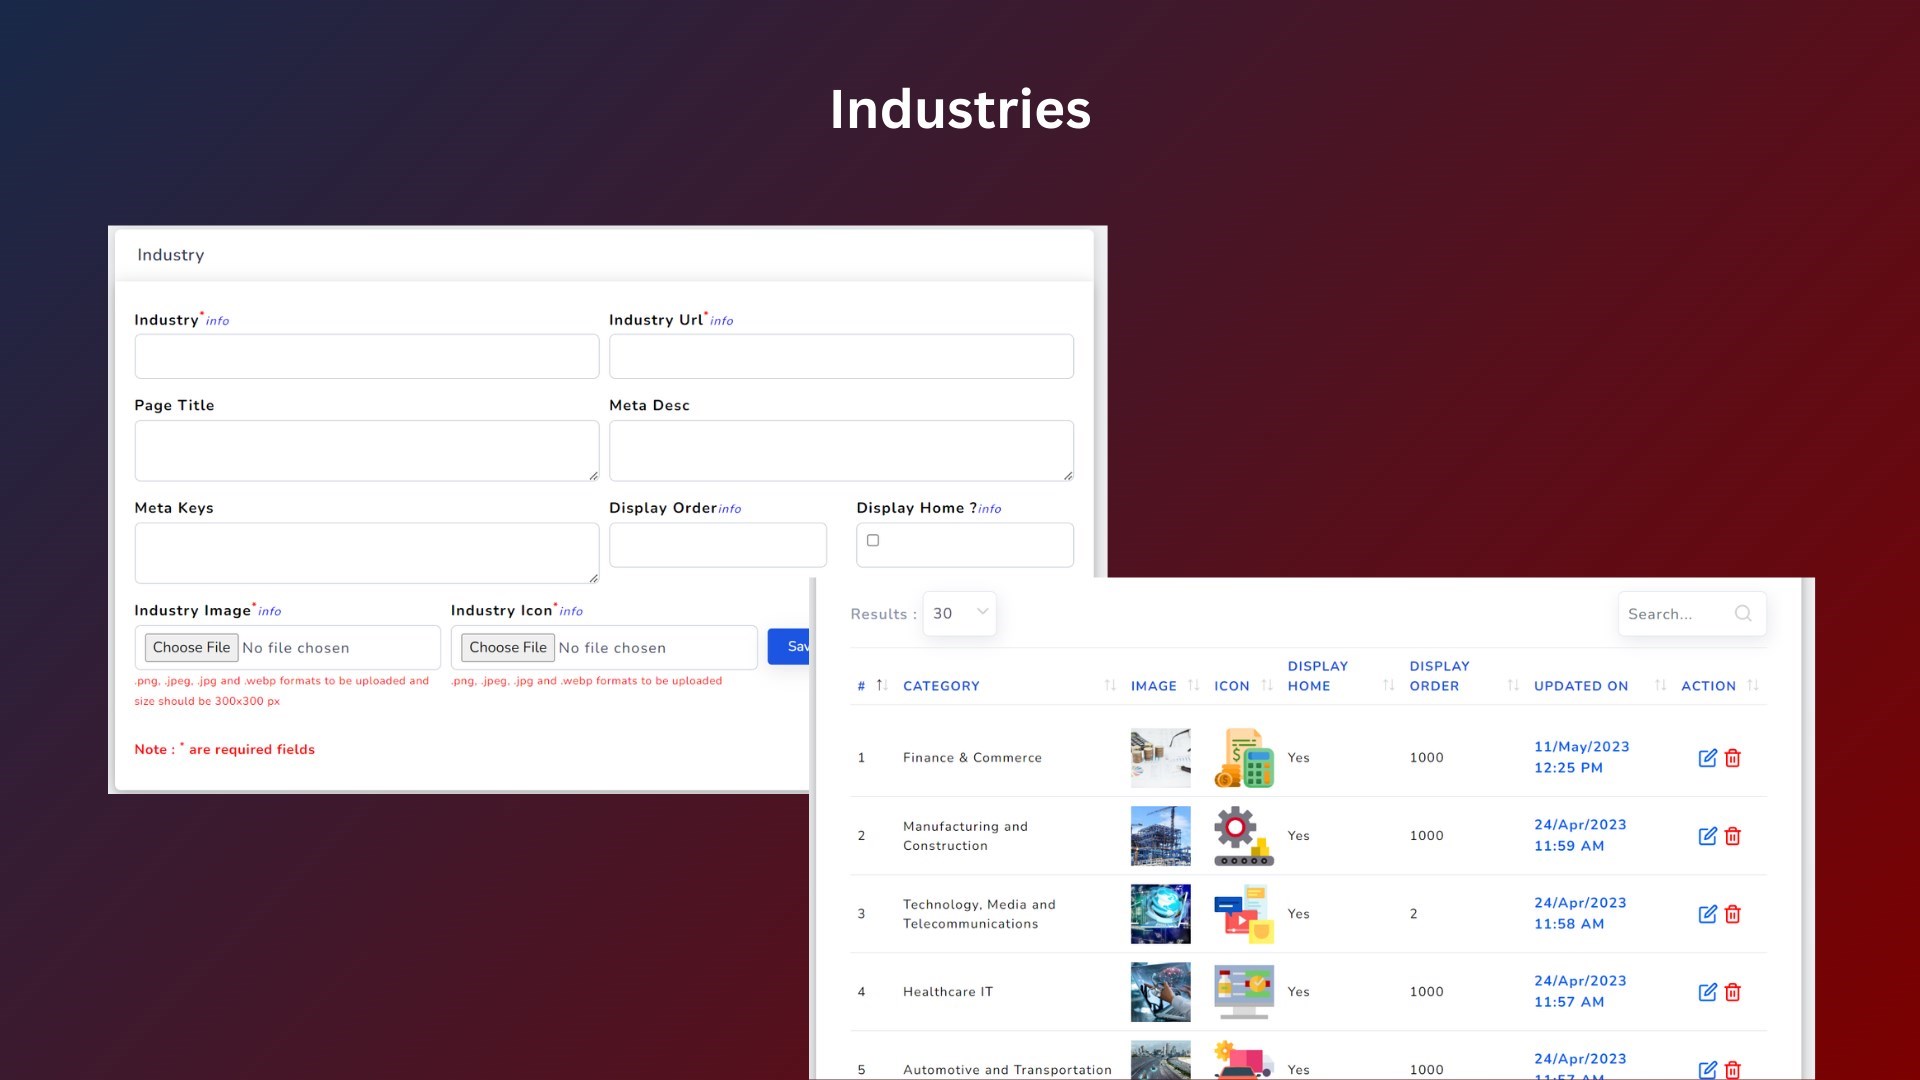 Feature for managing industries with an SEO enhancement option to update page titles, meta descriptions, and meta titles